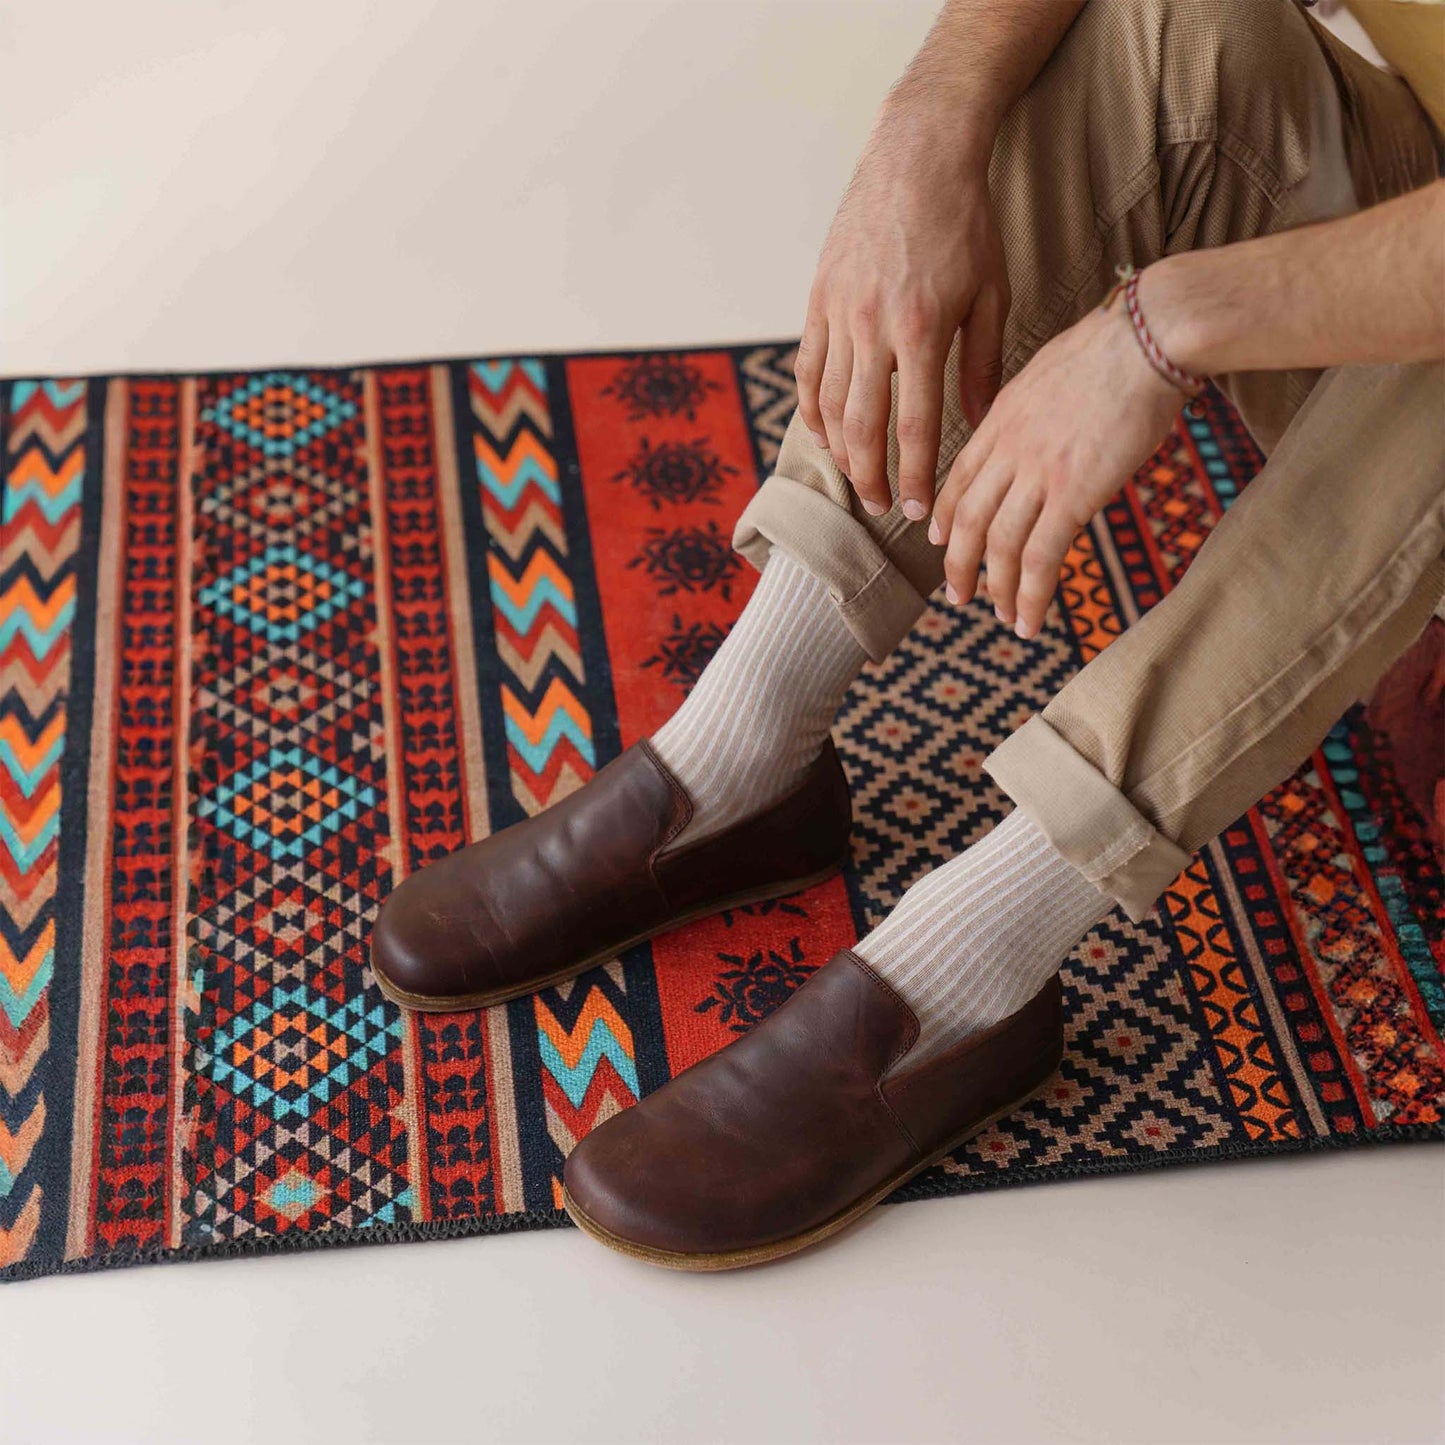 Comfortable brown Aeolia Leather Barefoot Men's Loafers on a vibrant patterned rug. Get yours at pelanir.com!